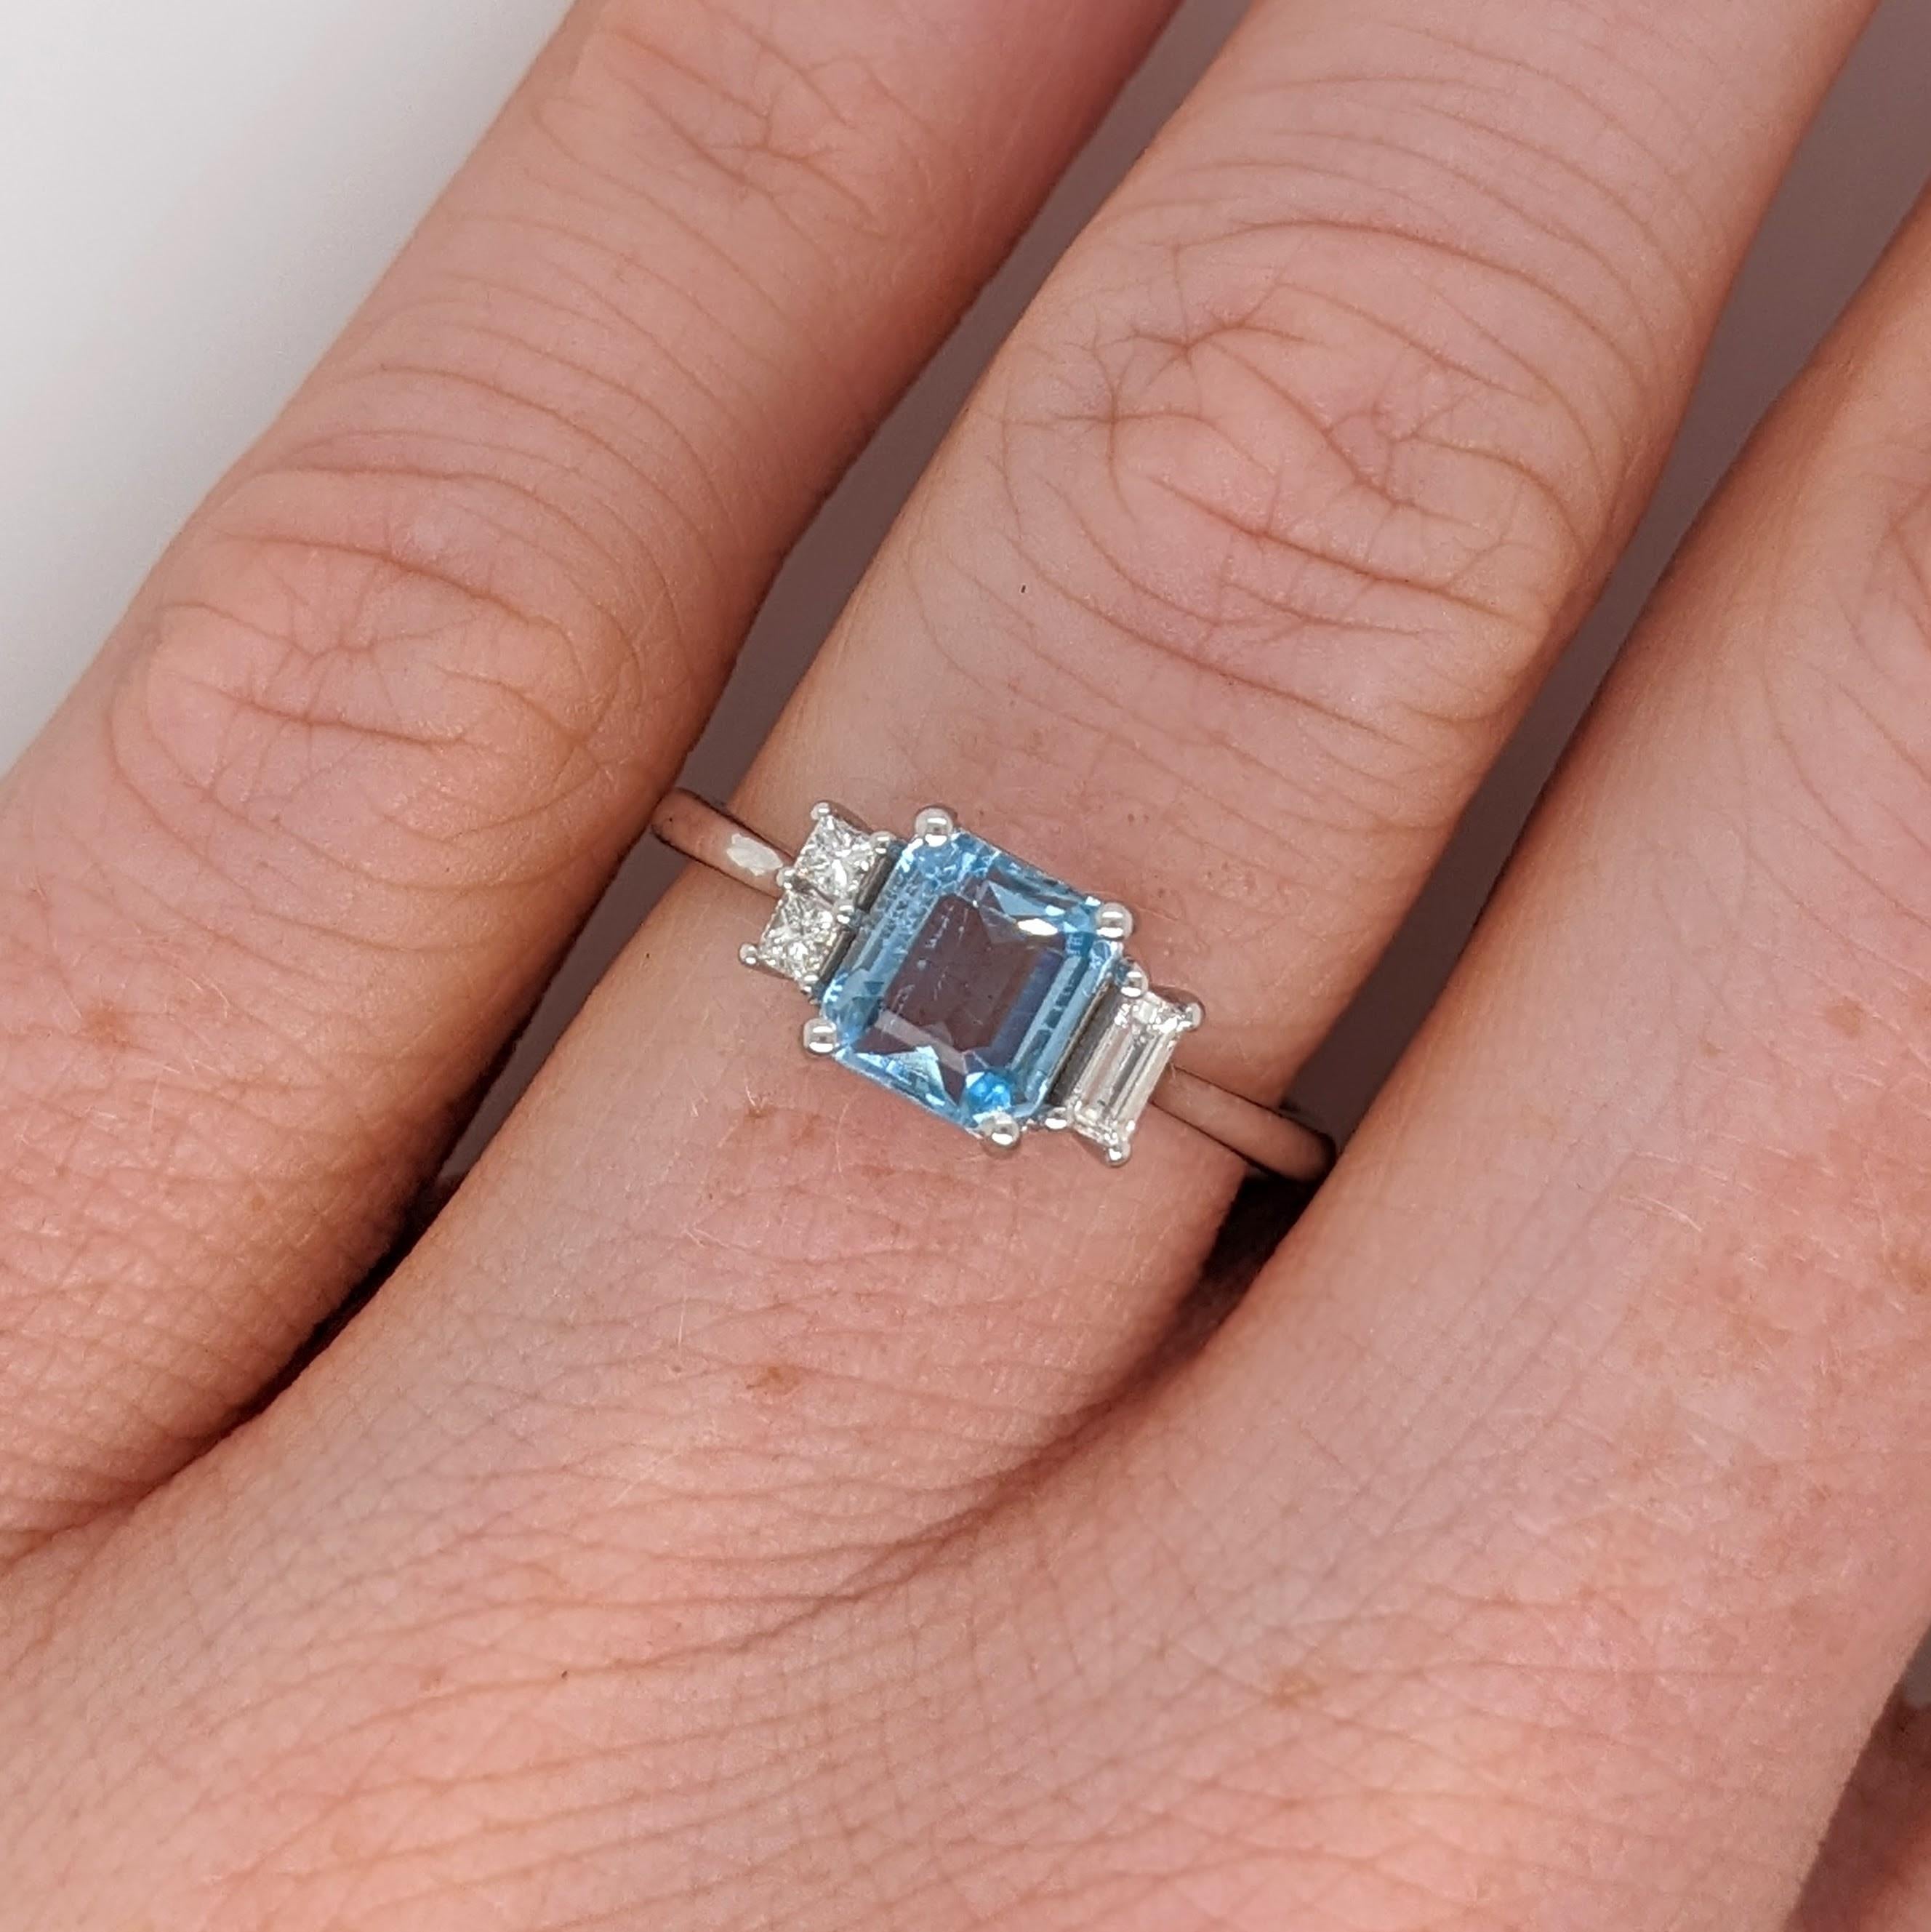 1ct Aquamarine Ring w Earth Mined Diamond in Solid 14K White Gold EM 6.5x5.5mm For Sale 1